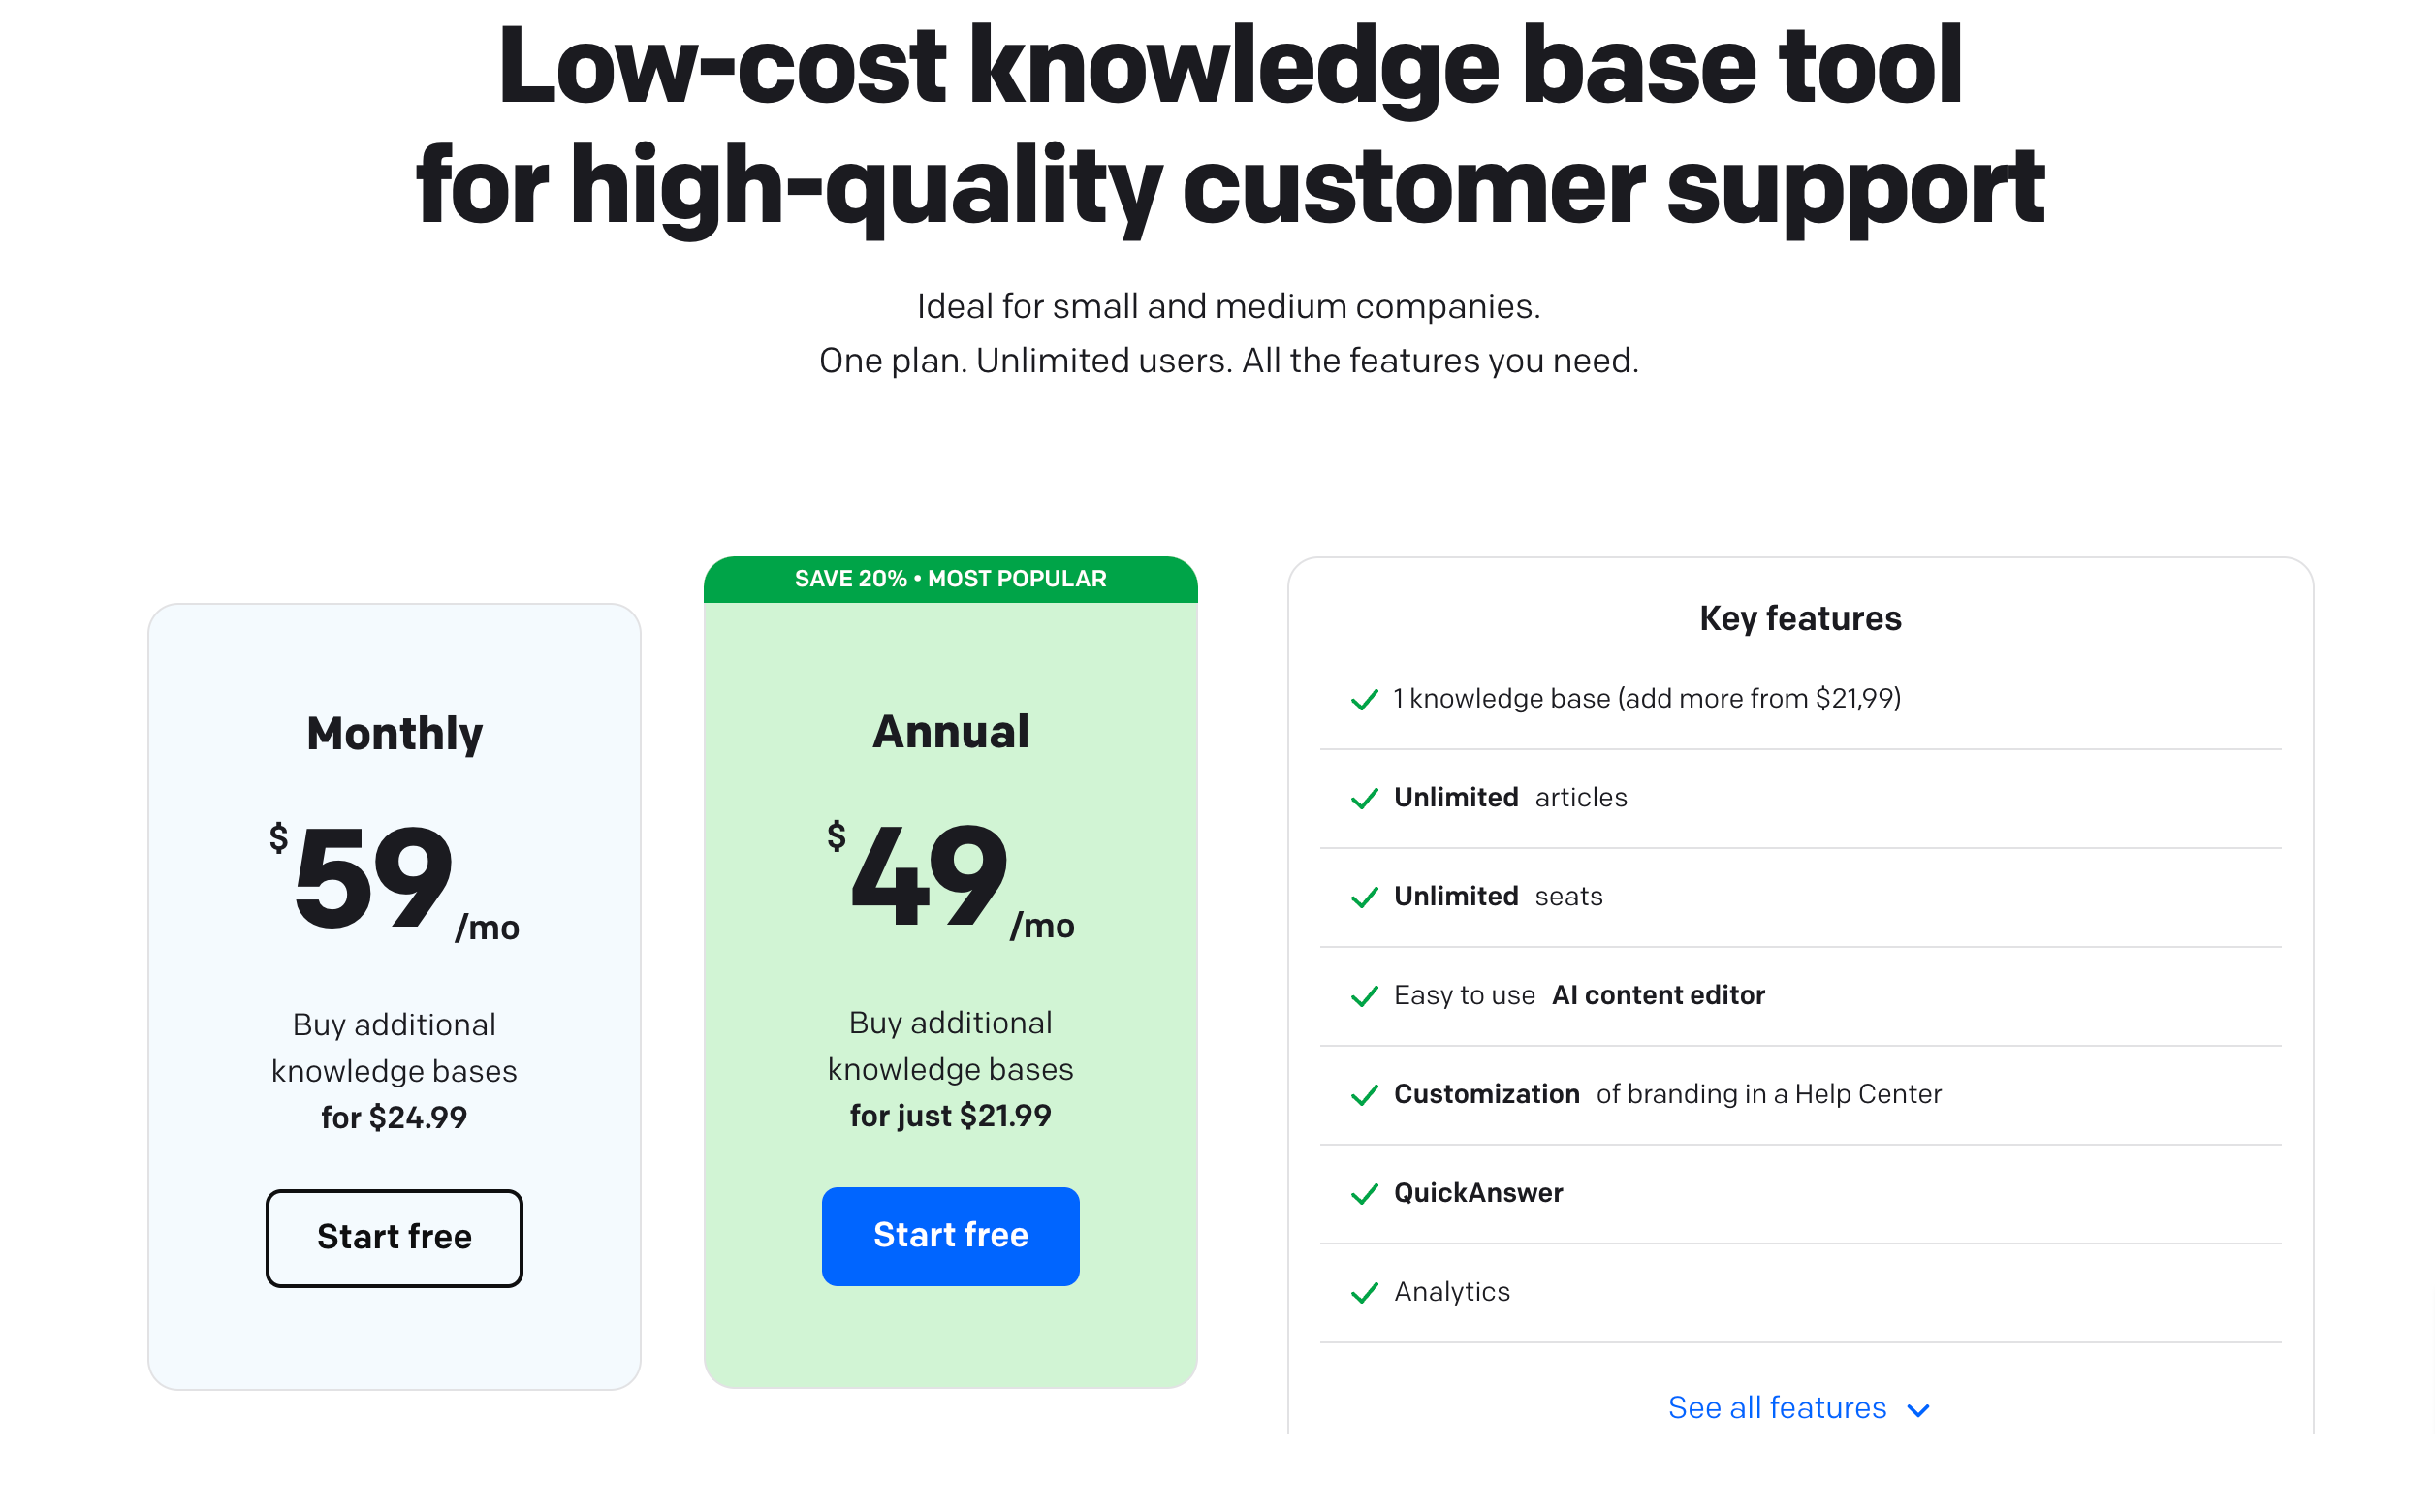 Pricing Start for Free KnowledgeBase